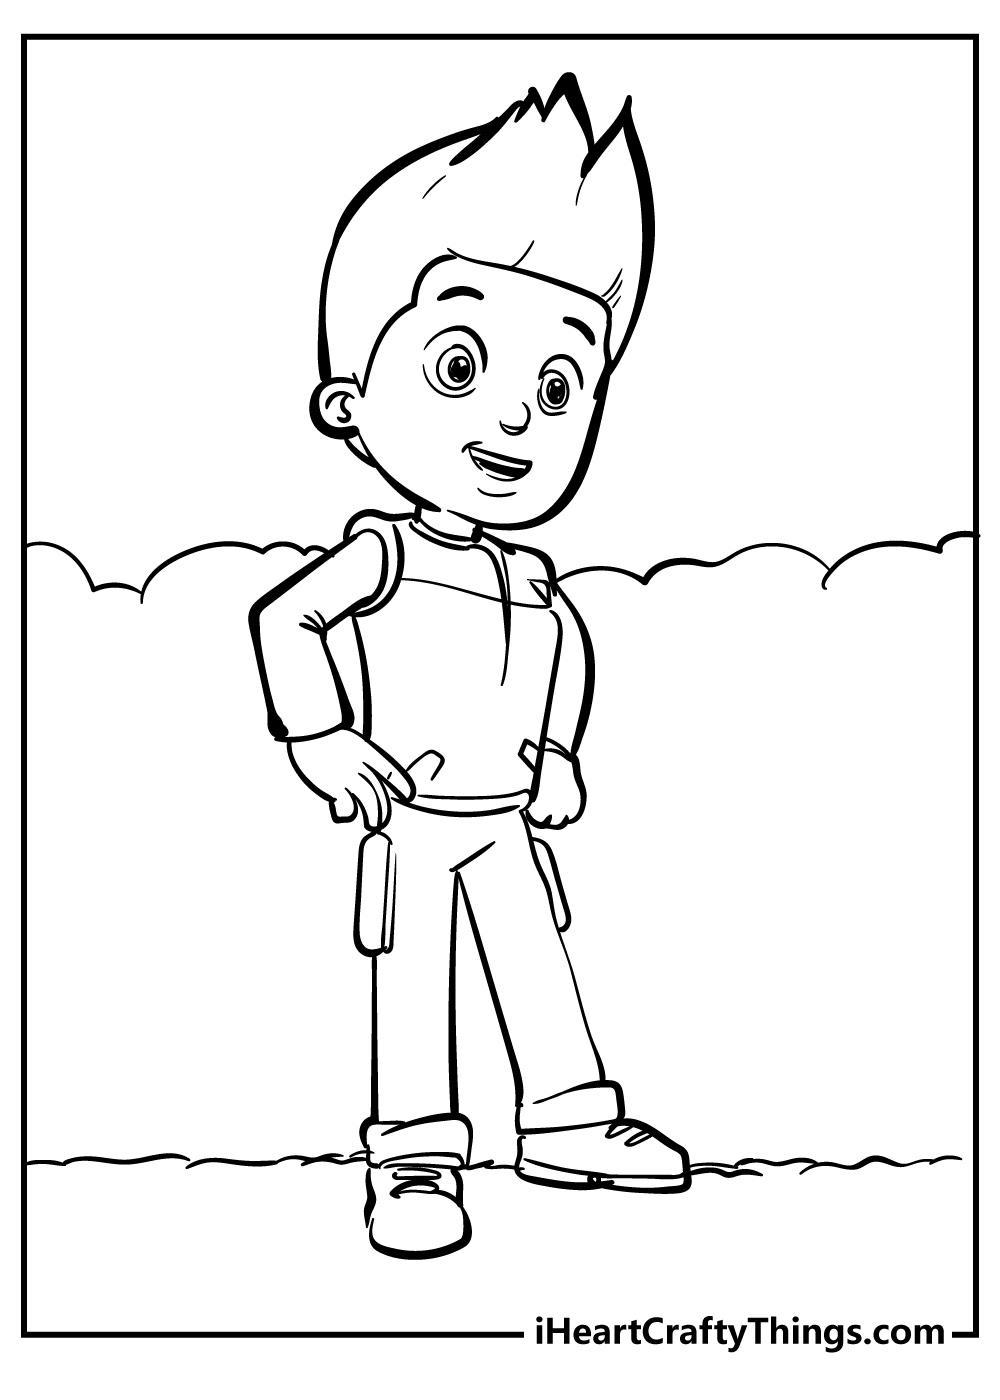 paw patrol coloring pages free printable